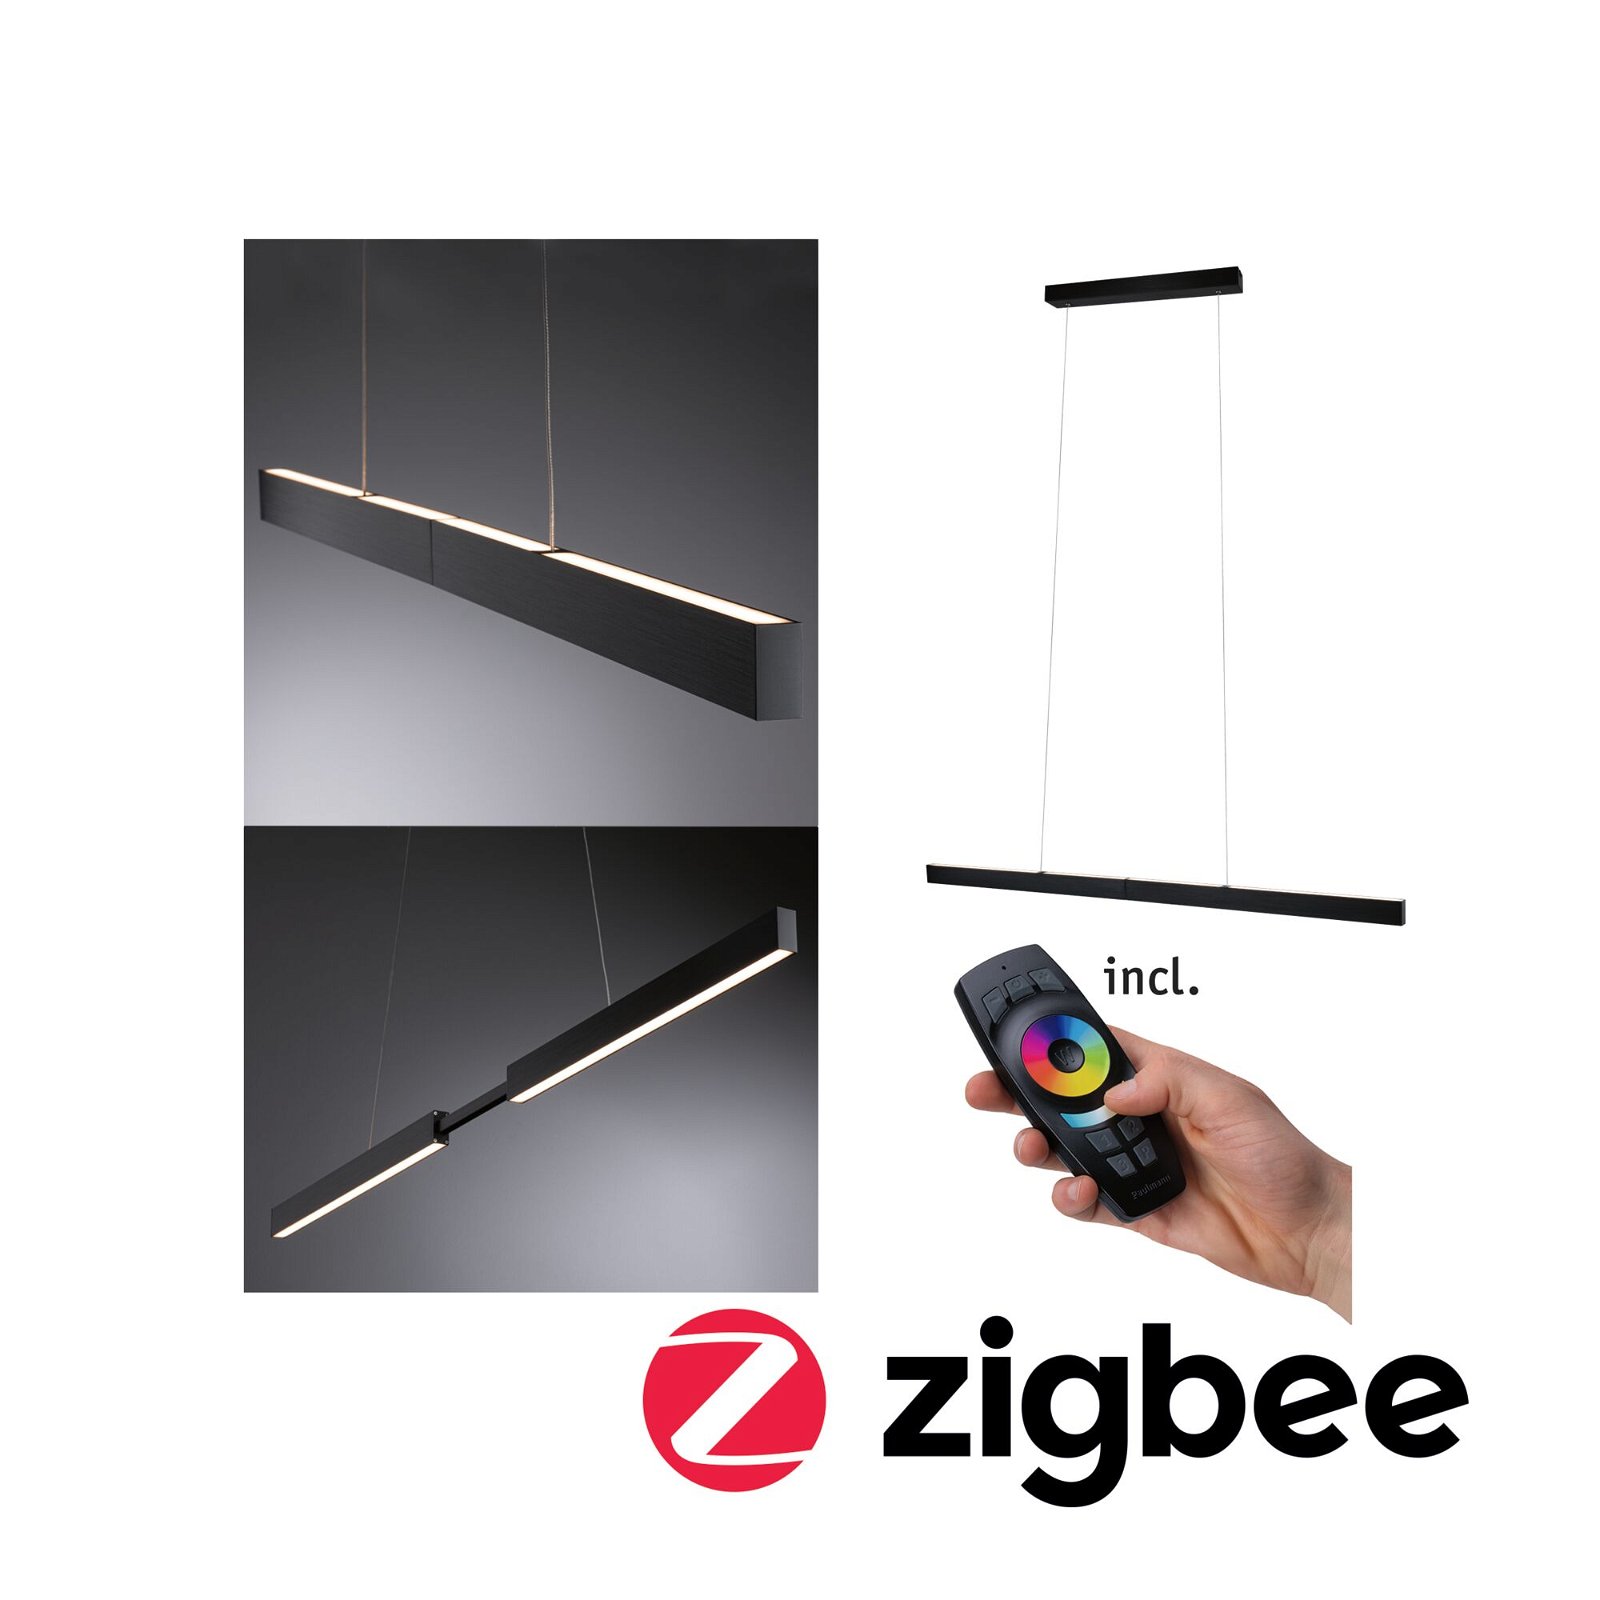 LED Pendant luminaire Smart Home Zigbee Aptare 2700K 2.050lm / 2.050lm 2x18 / 1x18W Black dimmable